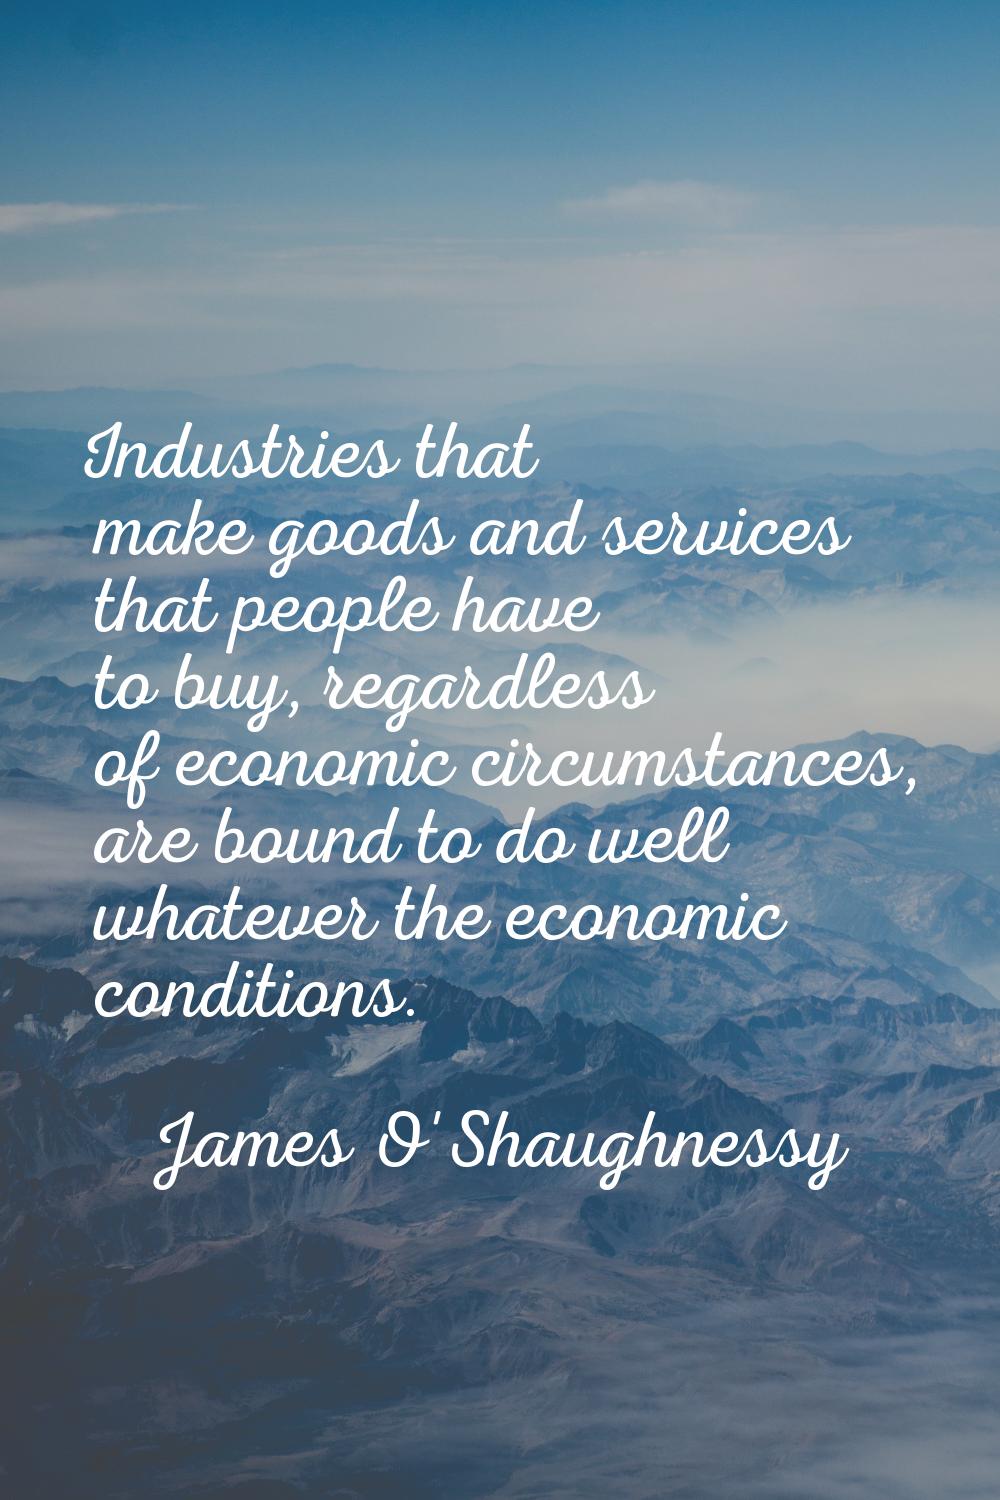 Industries that make goods and services that people have to buy, regardless of economic circumstanc